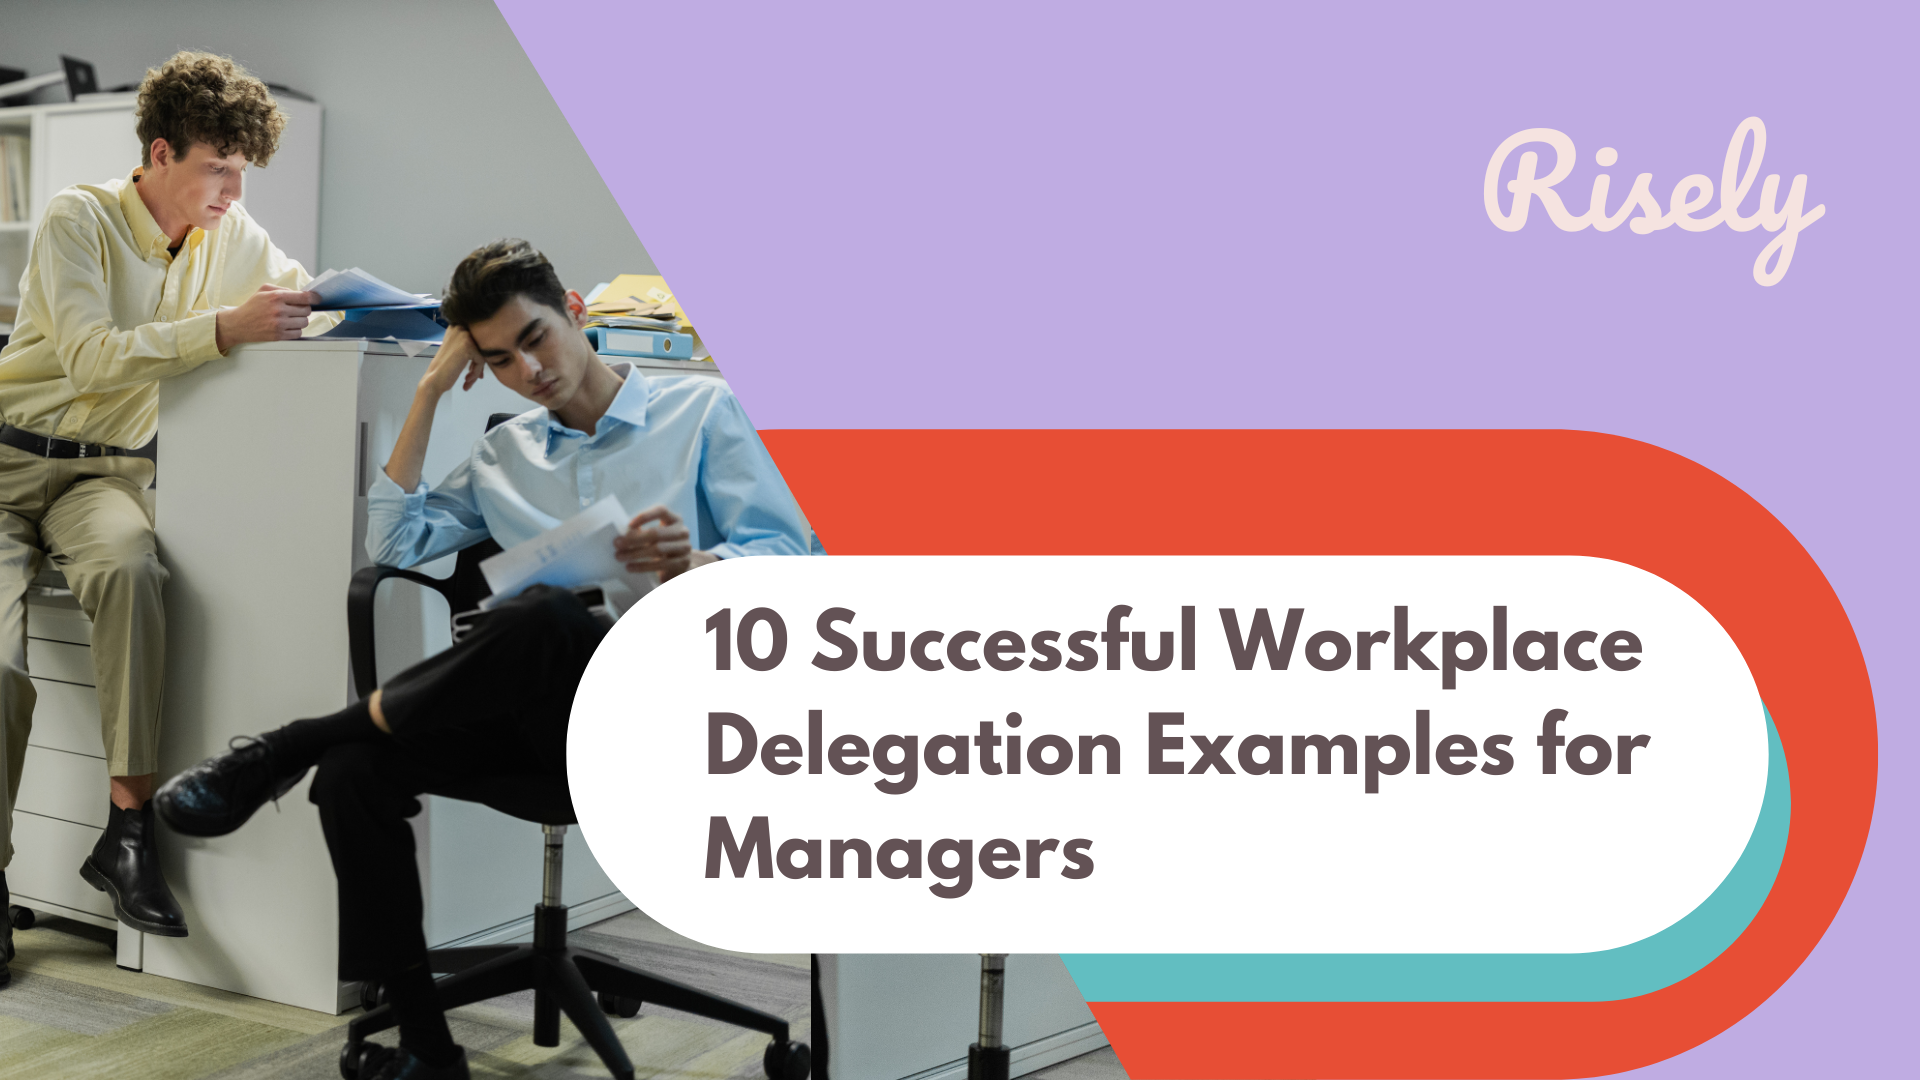 10 Successful Workplace Delegation Examples for Managers